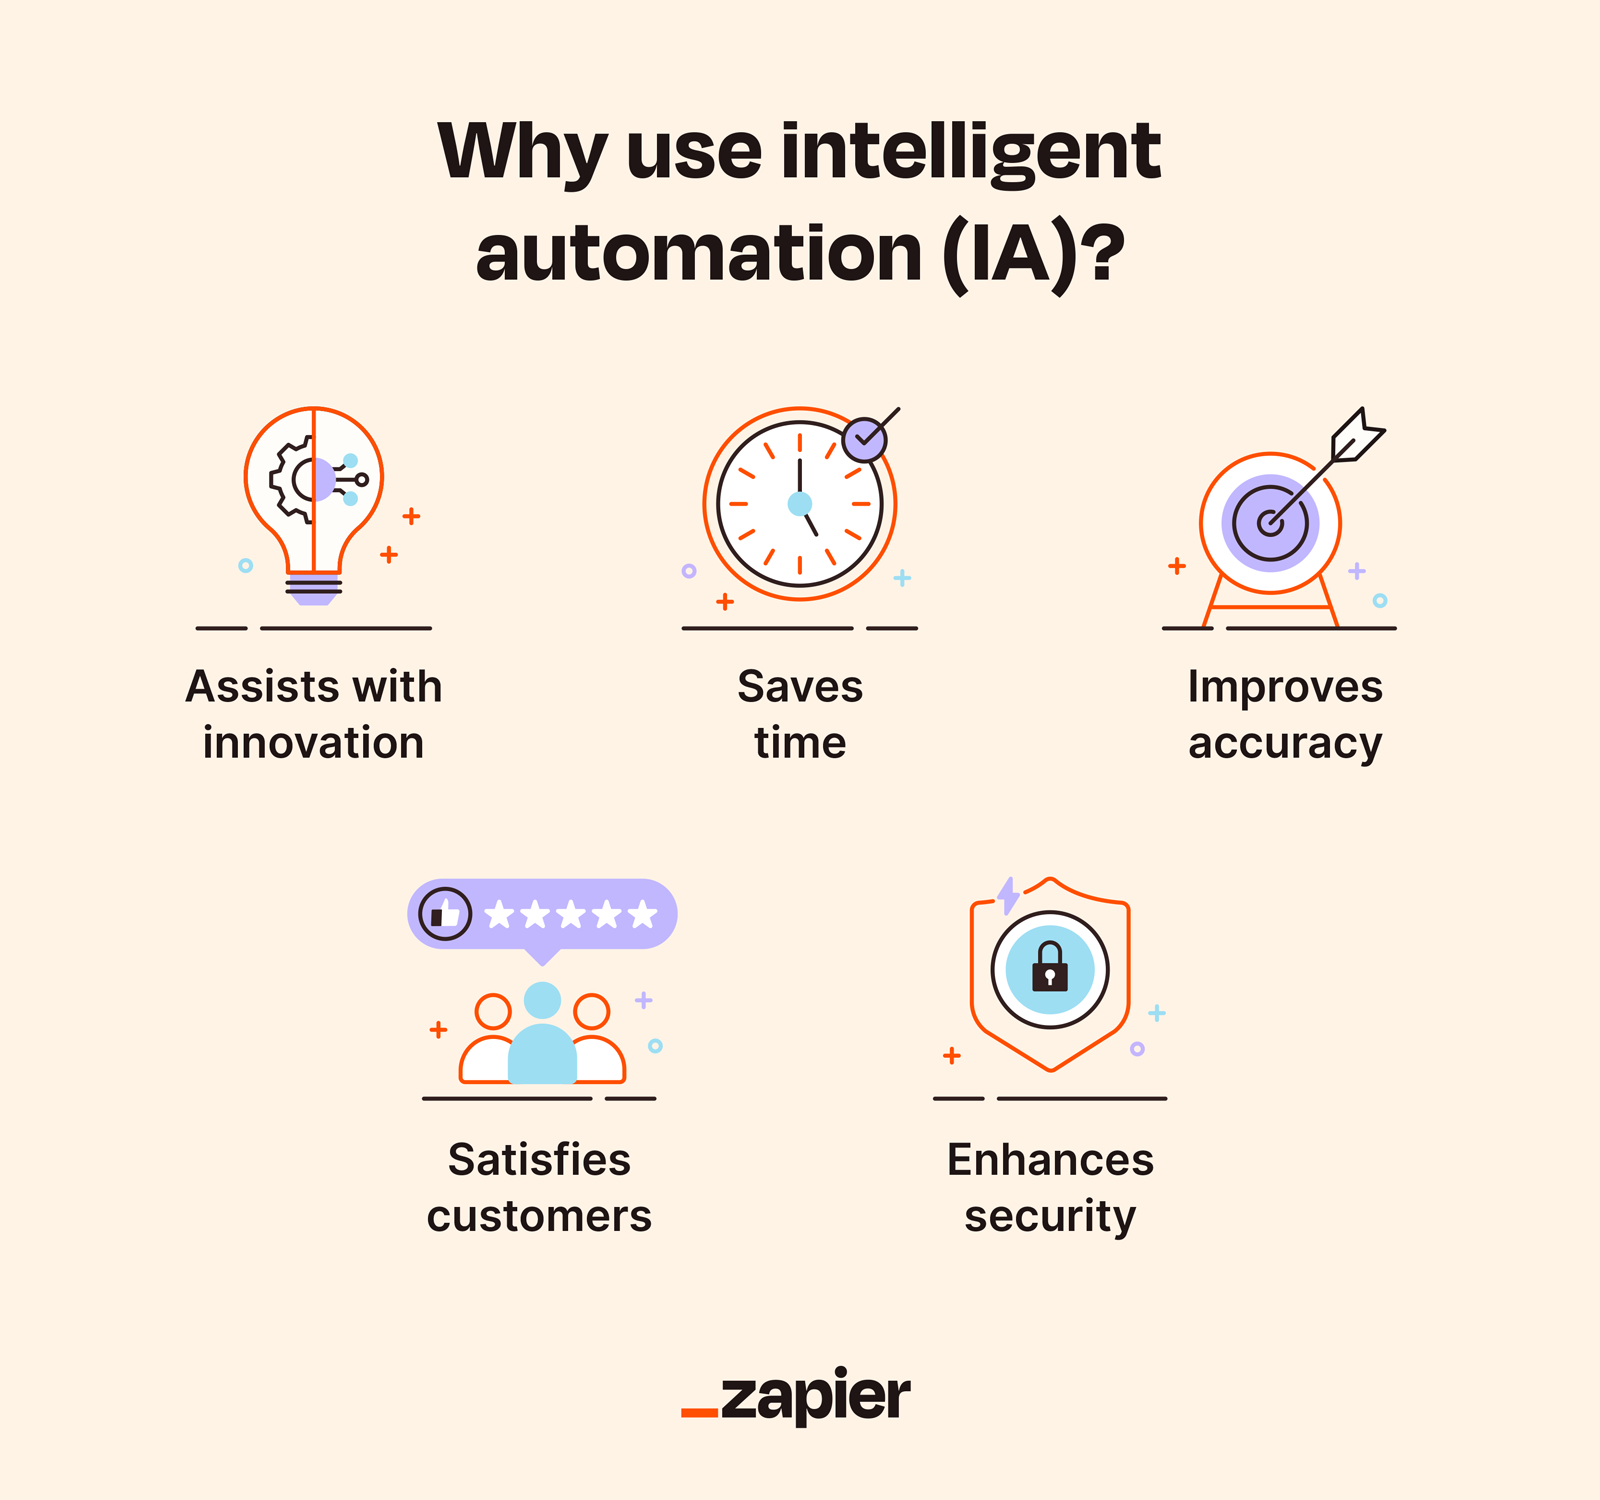 Intelligent automation: What it is and how to apply it